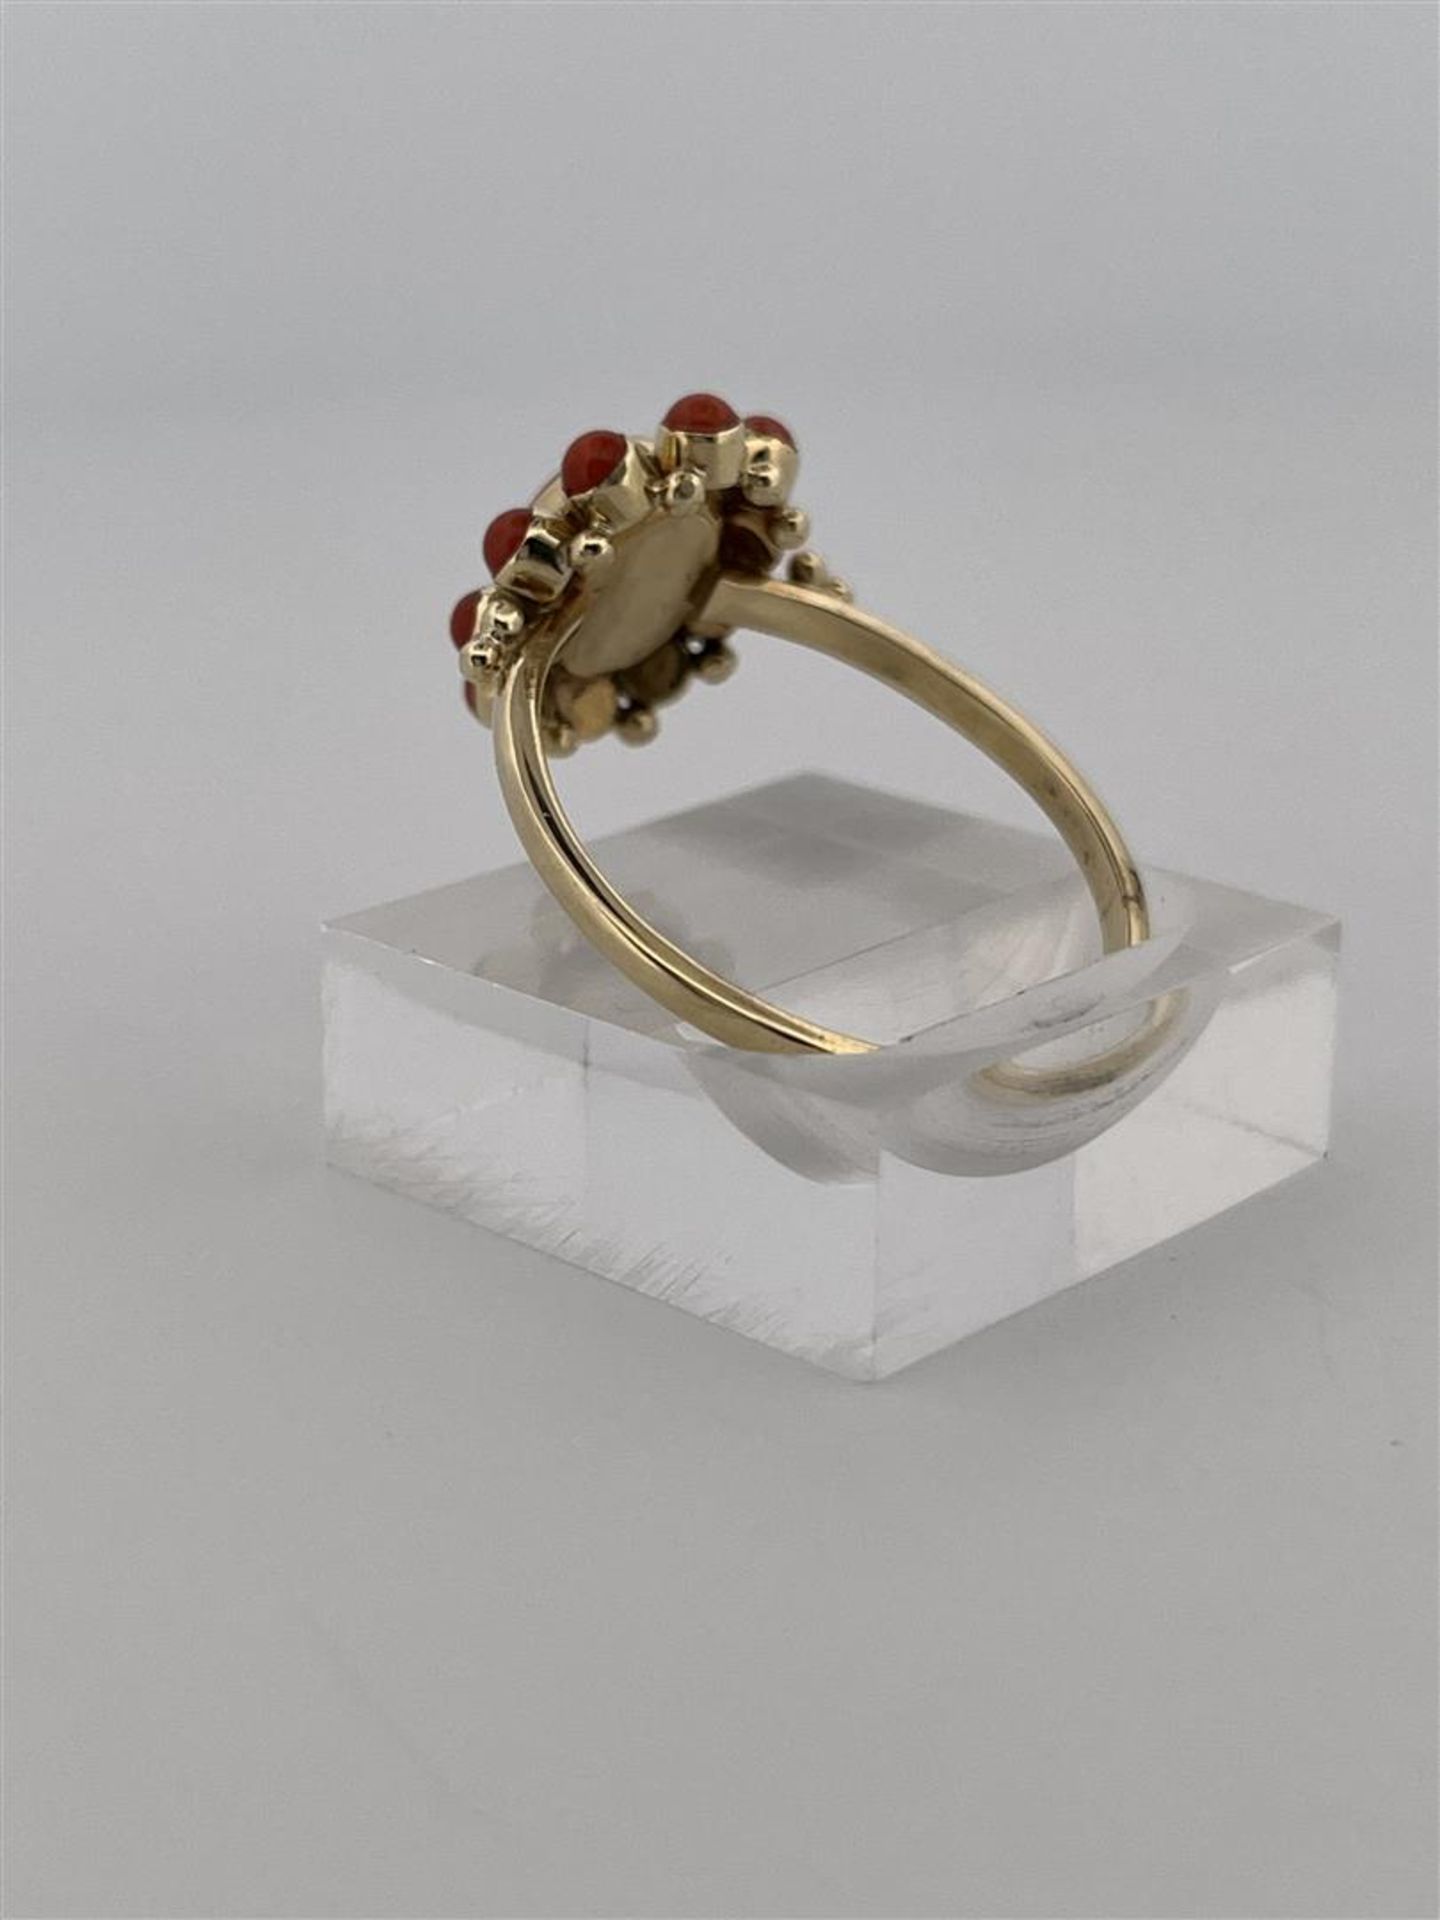 14kt yellow gold rosette ring set with red coral.
The ring is set with 1 central oval cabochon cut r - Image 4 of 7